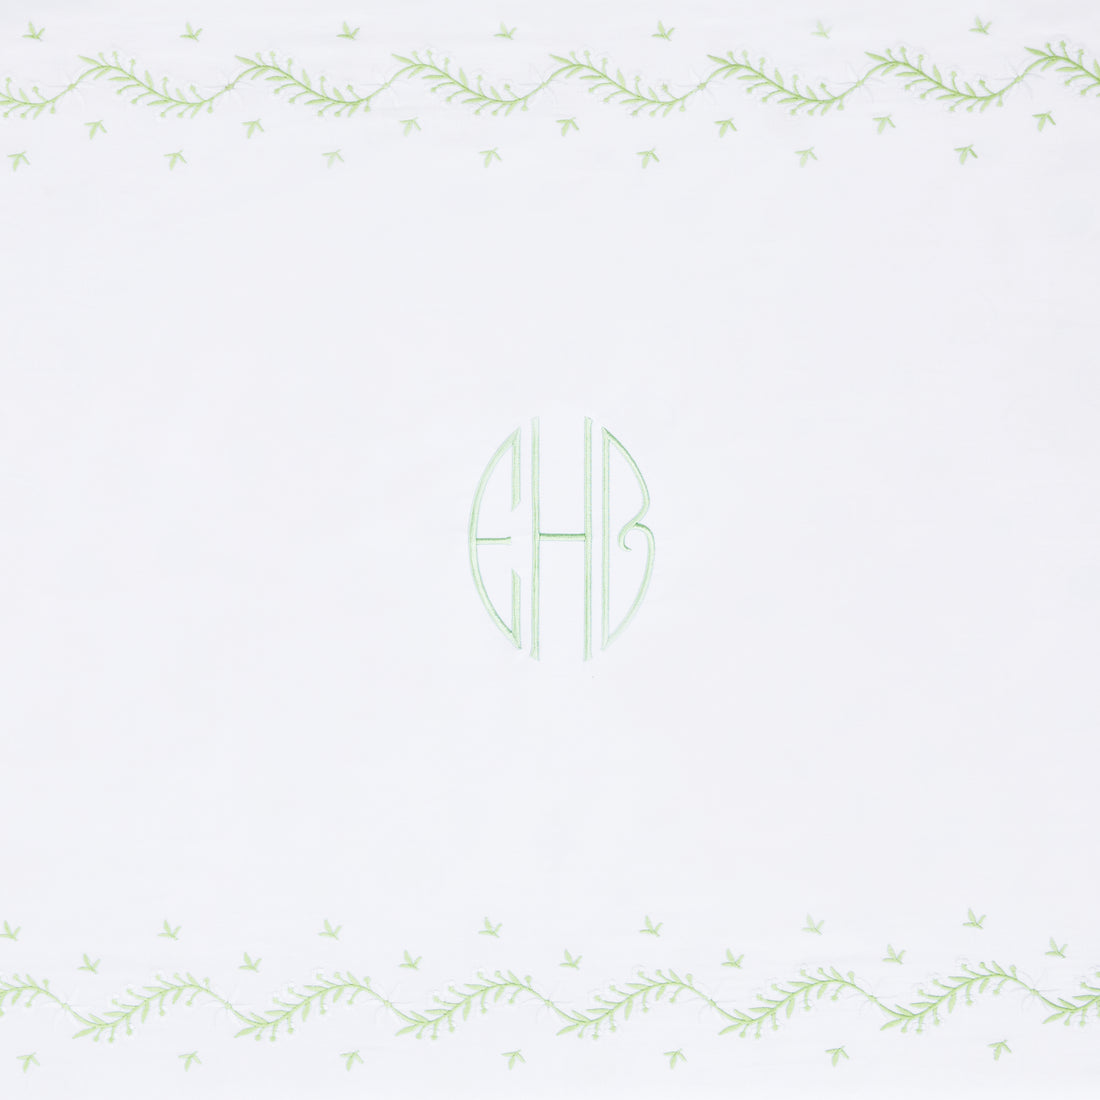 Little English classic nursery goods for baby, white crib sheet with simple light green embroidery along the edges for baby